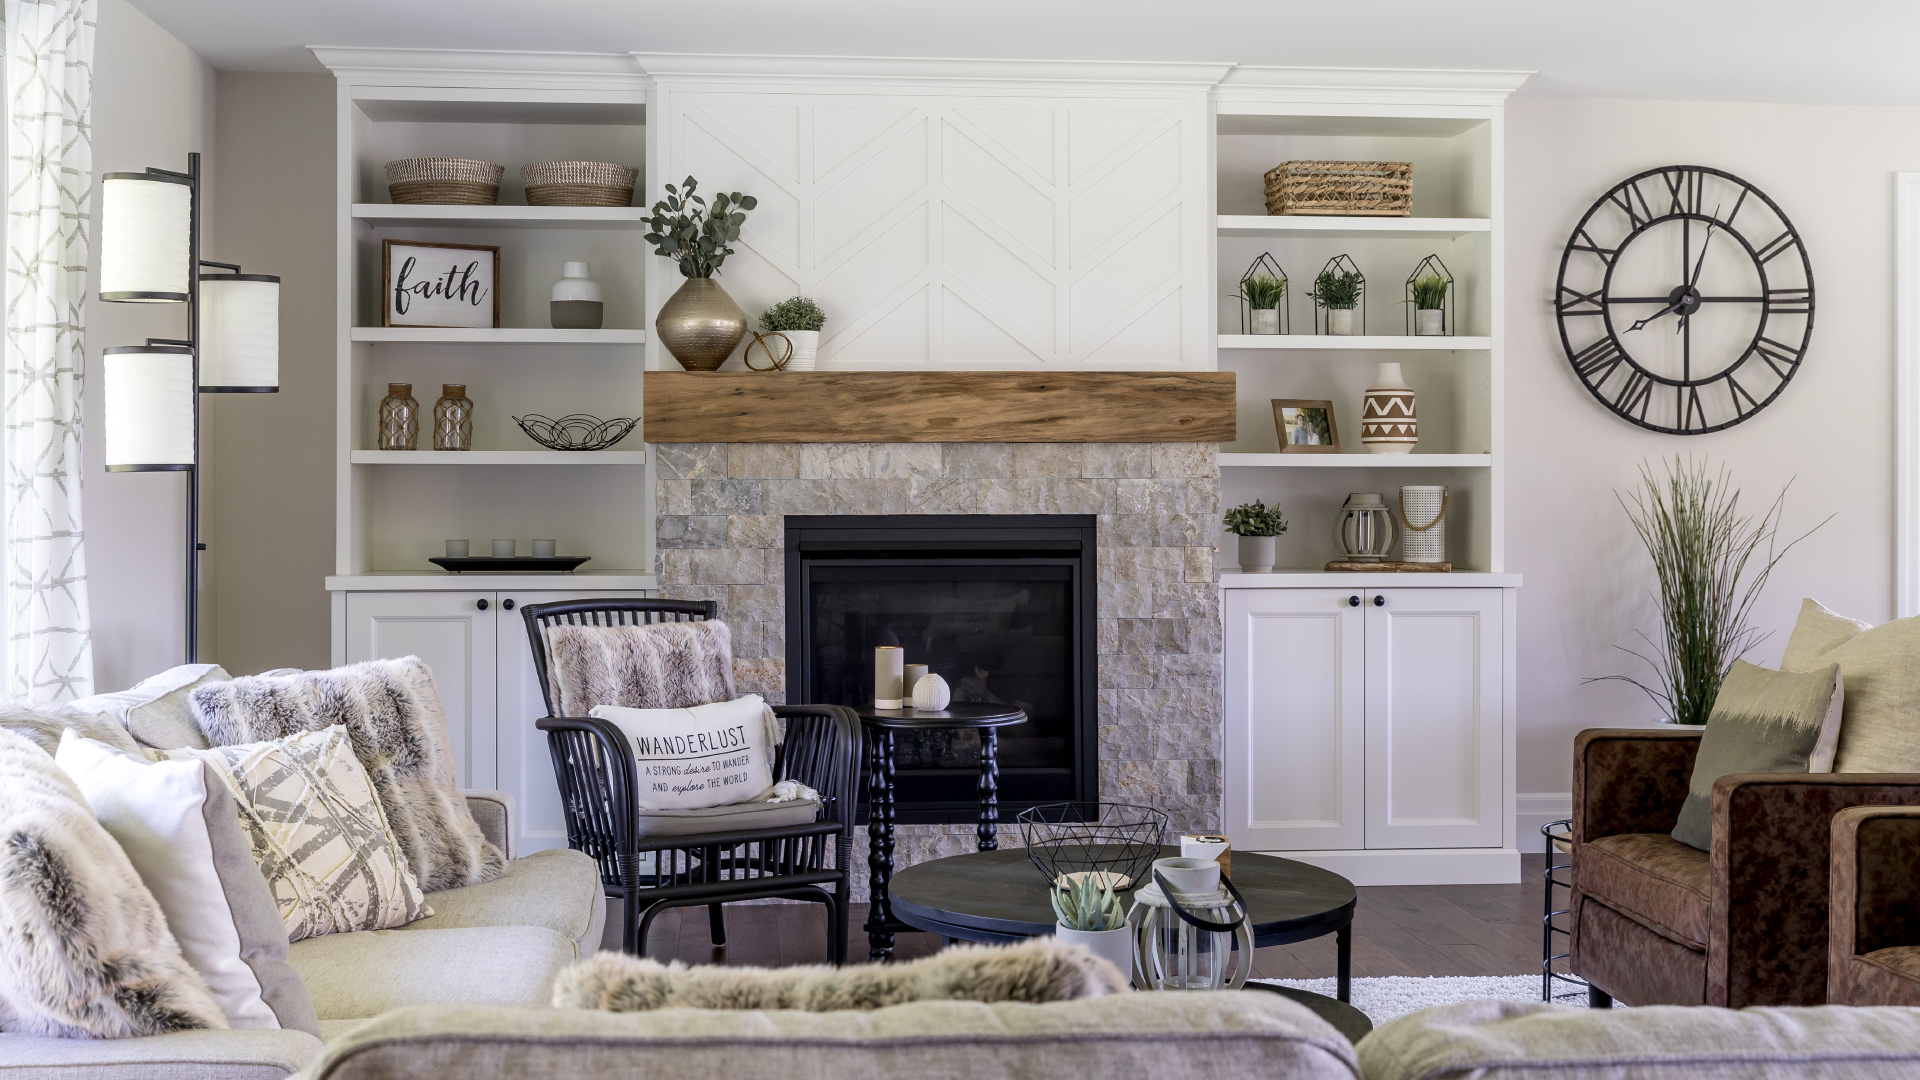 Custom fire place with shelves